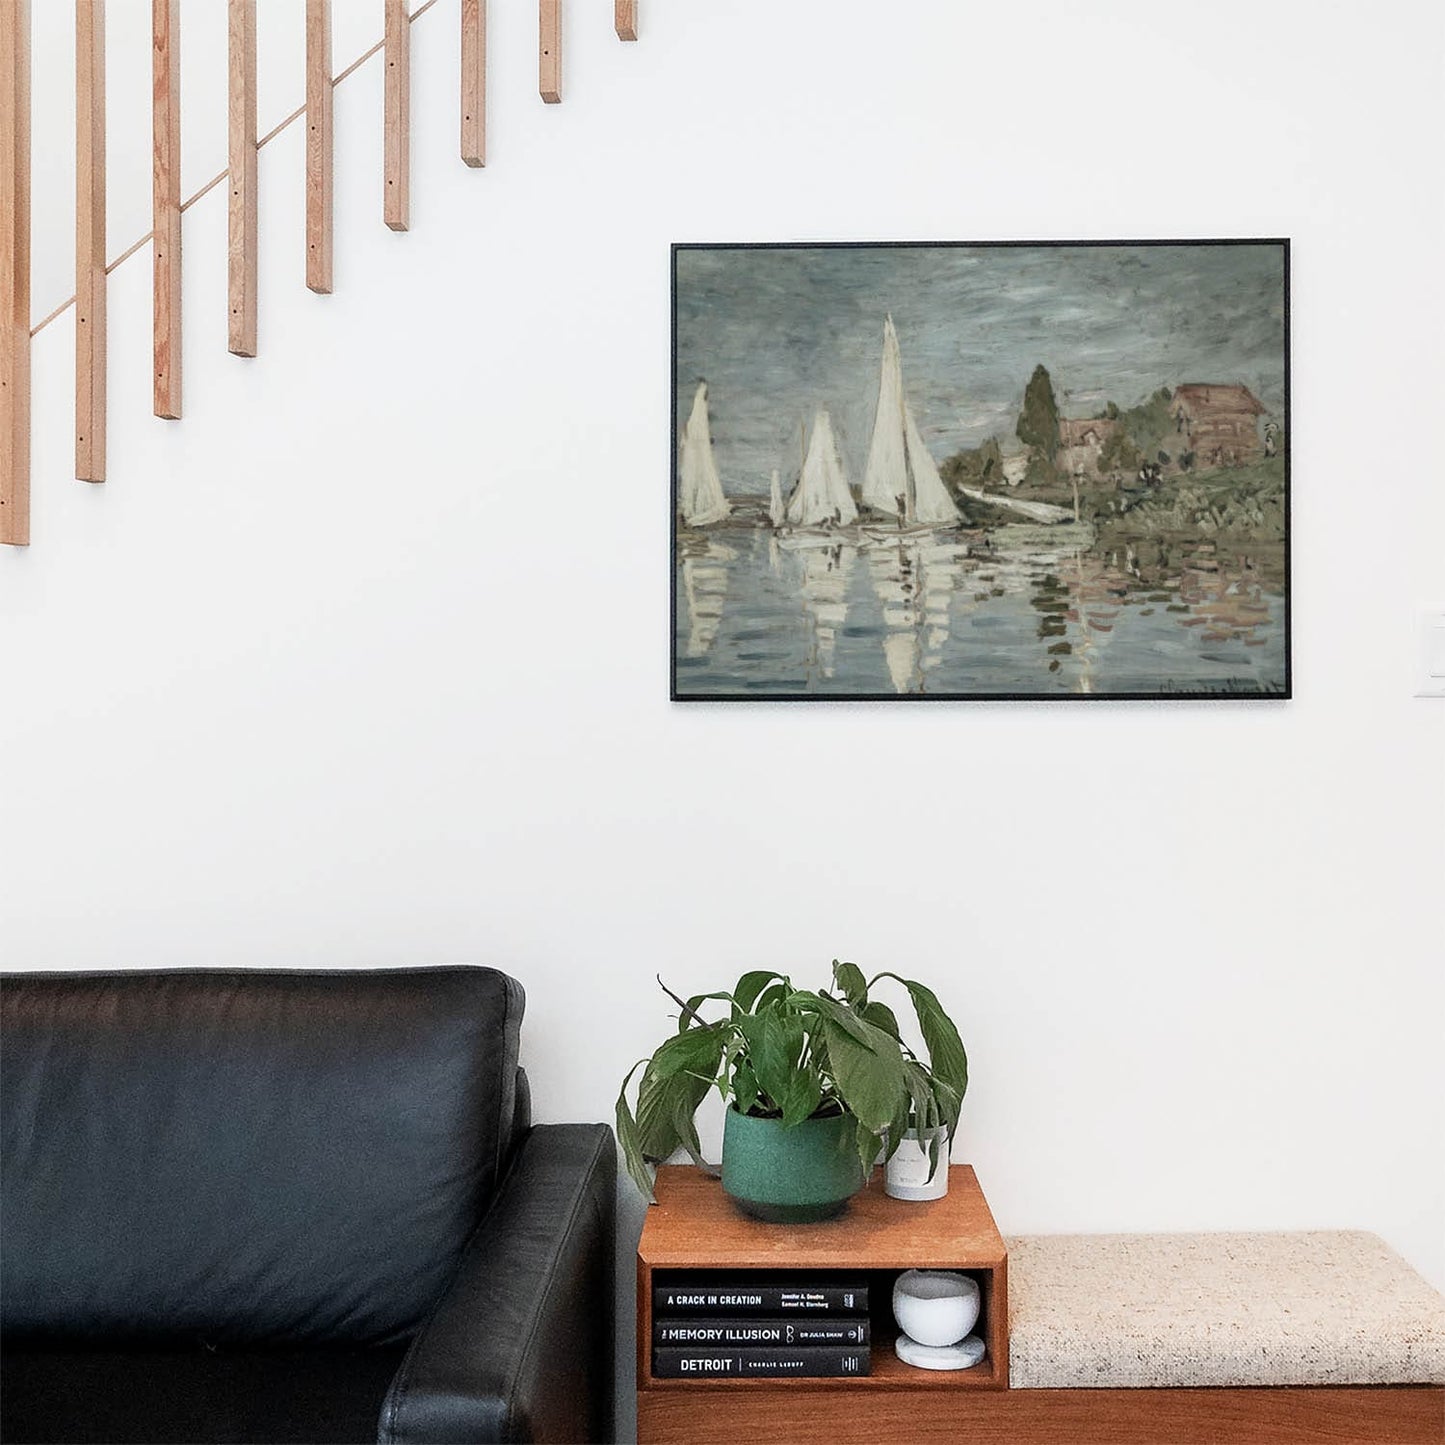 Living space with a black leather couch and table with a plant and books below a staircase featuring a framed picture of Sail Boats